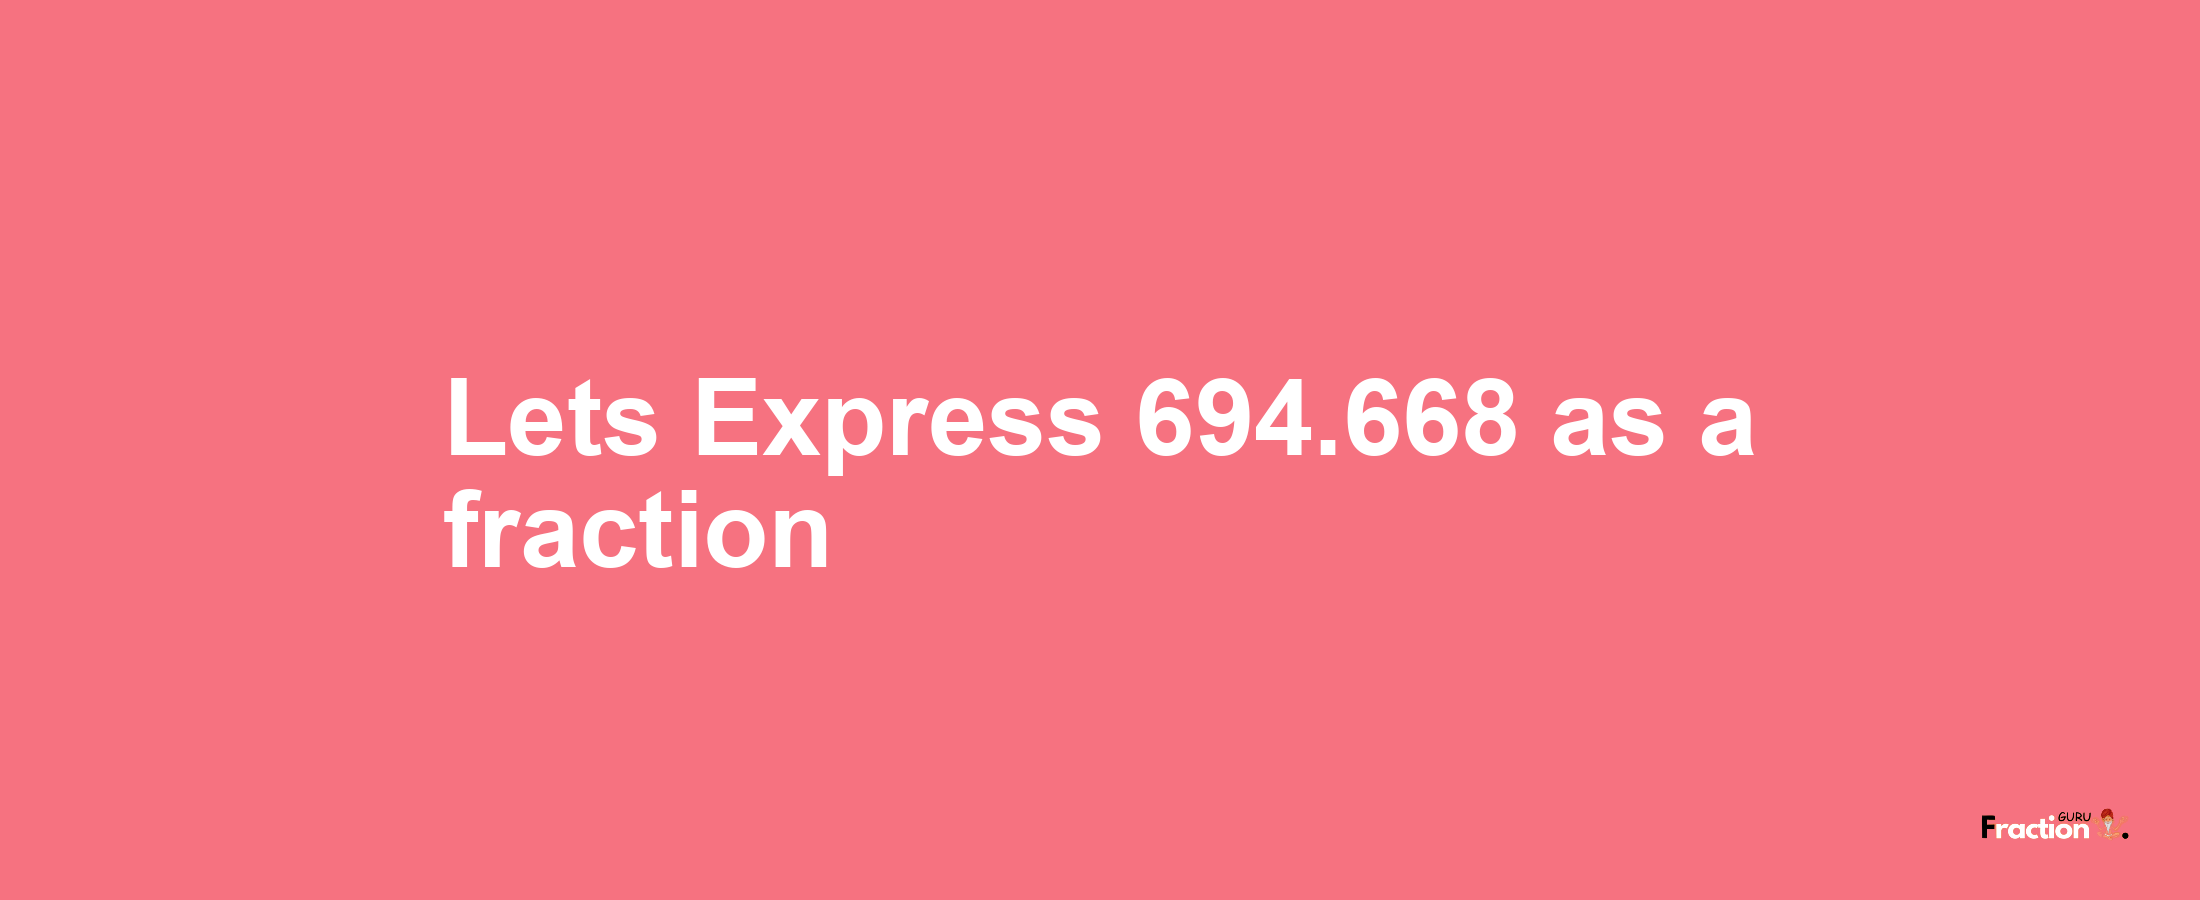 Lets Express 694.668 as afraction